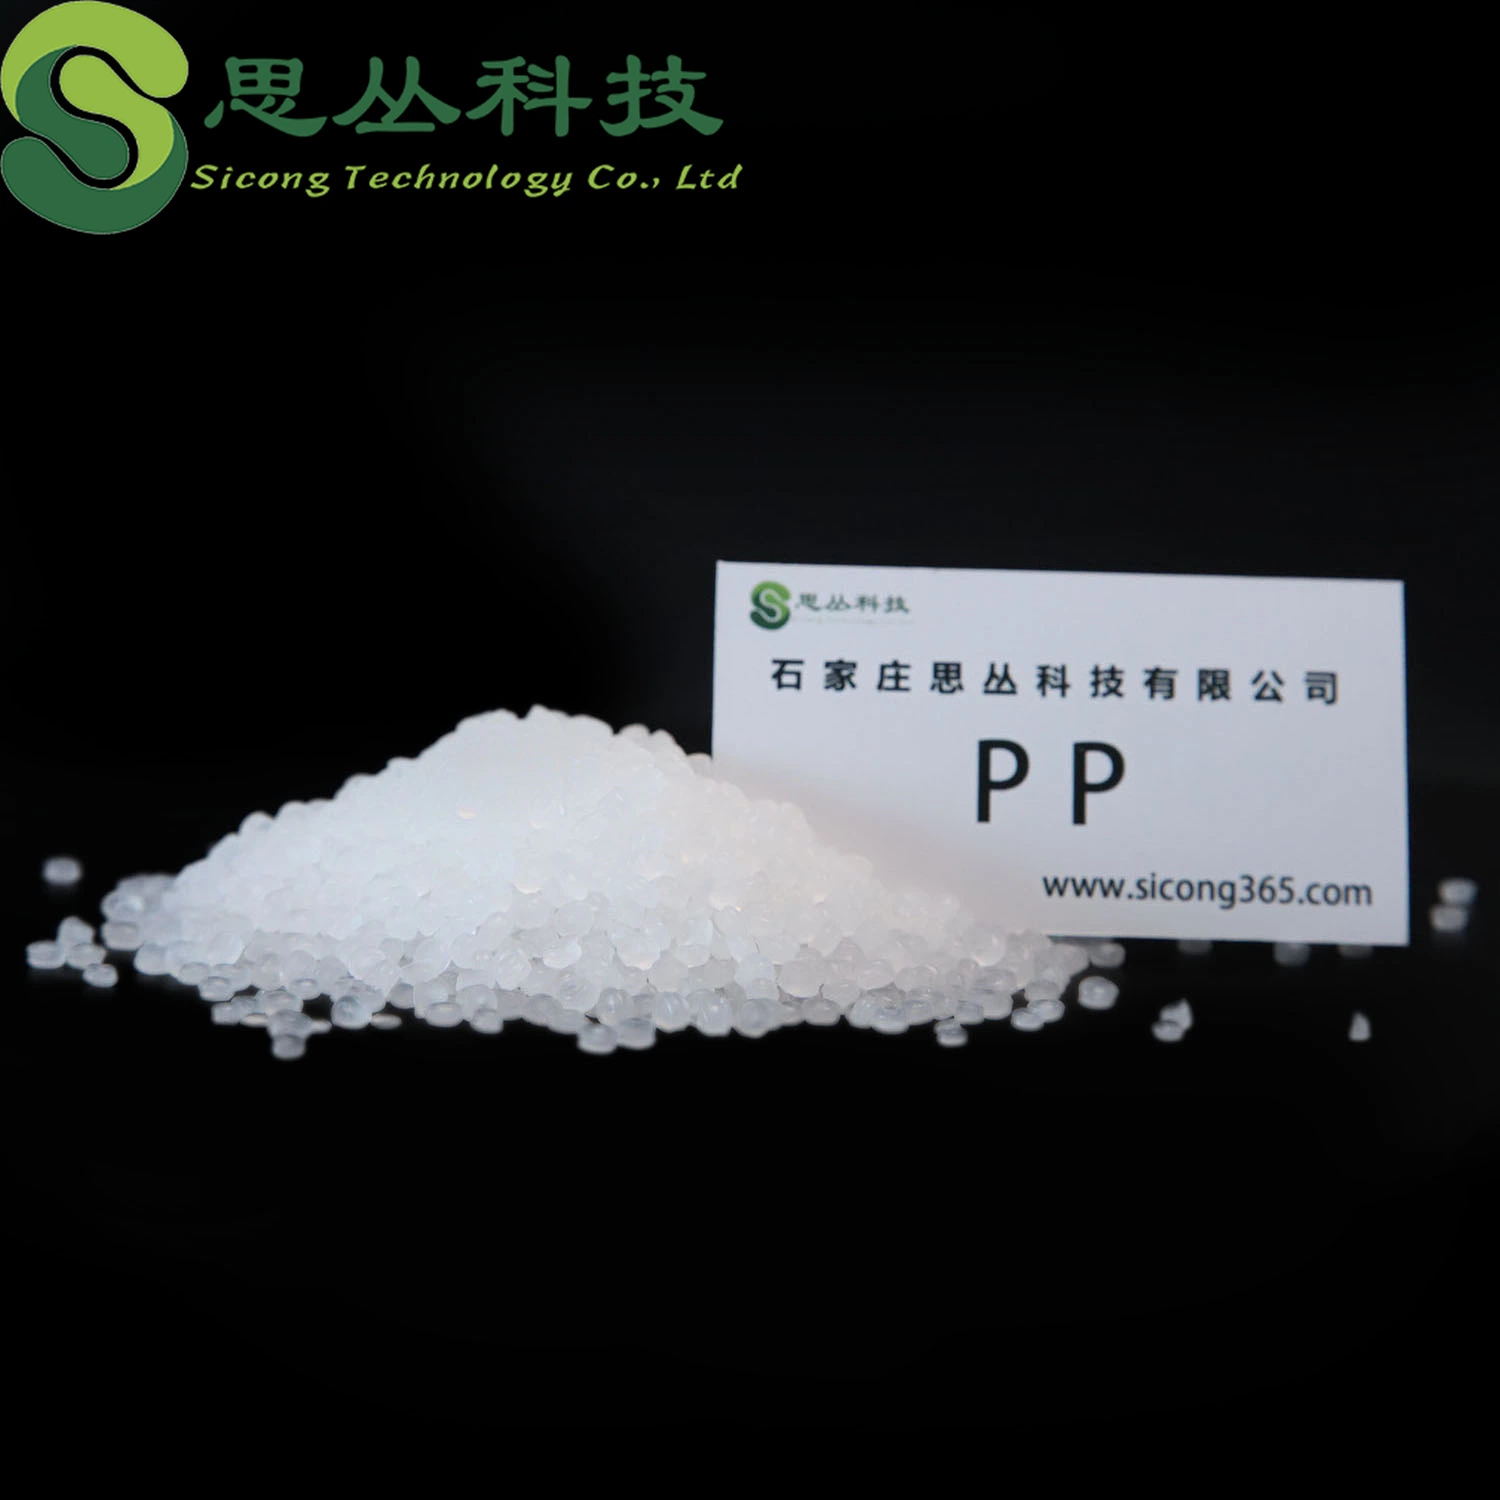 100% Virgin Granules/ Polypropylene Raw Material PP for Injection Molding Grade and Film Special Material for Wear Resistance, High Impact Resistance,